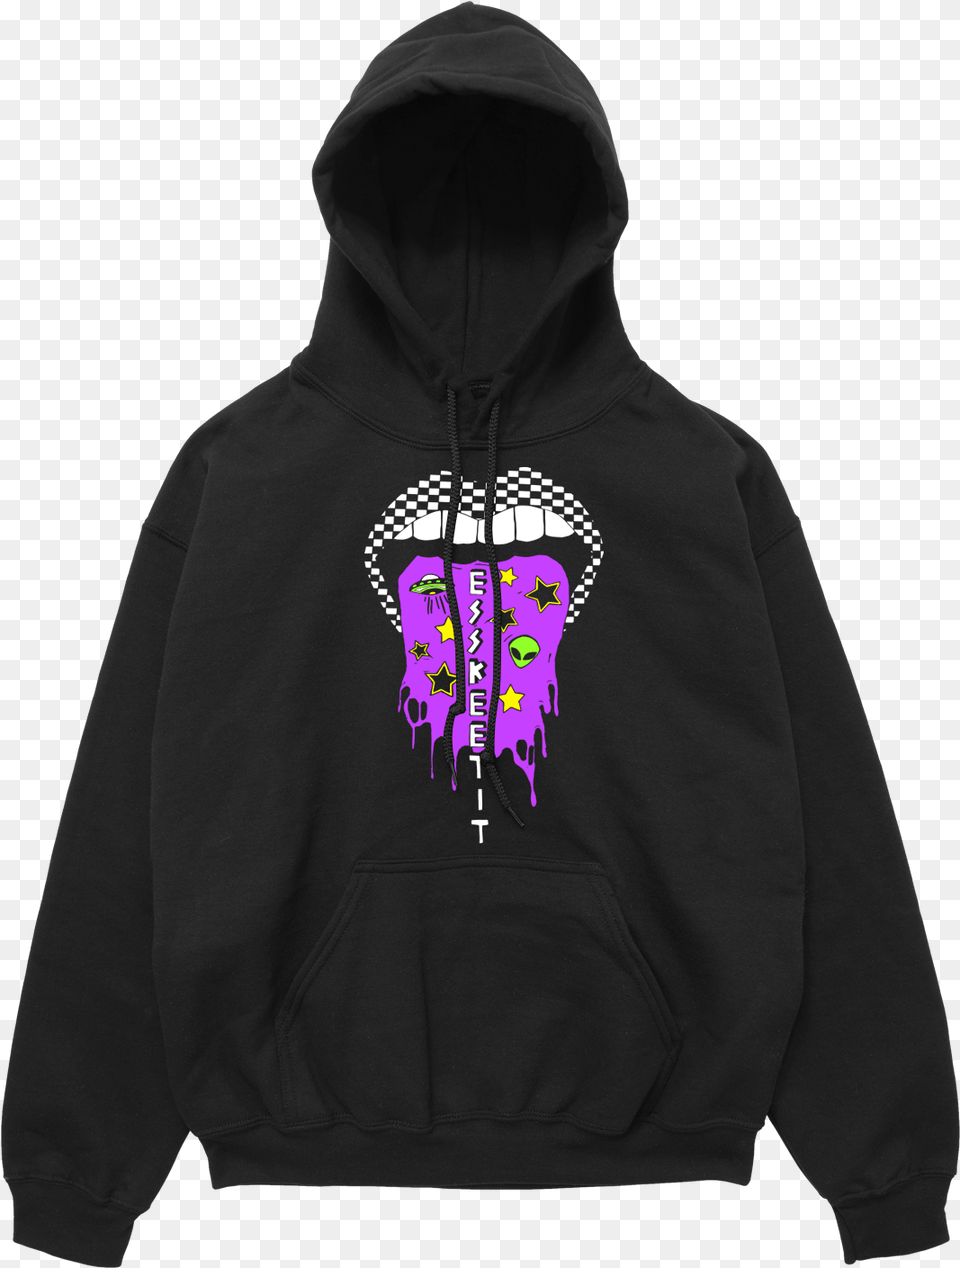 Unhappy Lil Pump Hoodie, Clothing, Hood, Knitwear, Sweater Free Png